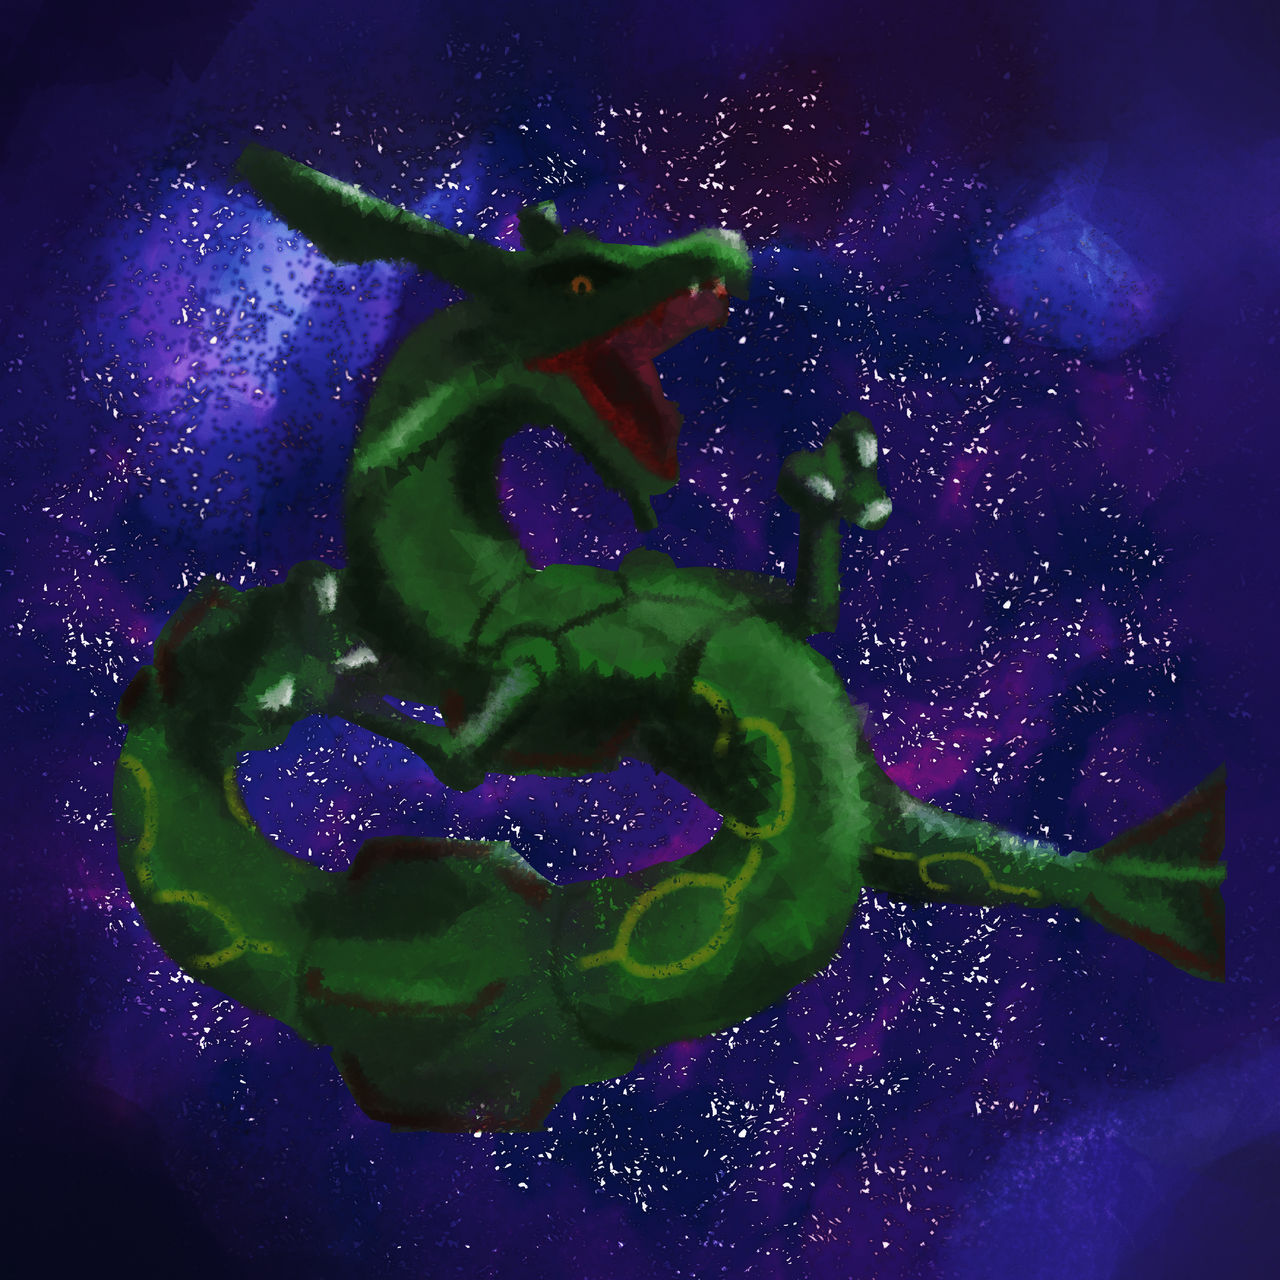 comm - space psyduck and shiny rayquaza by Incogneko on Newgrounds